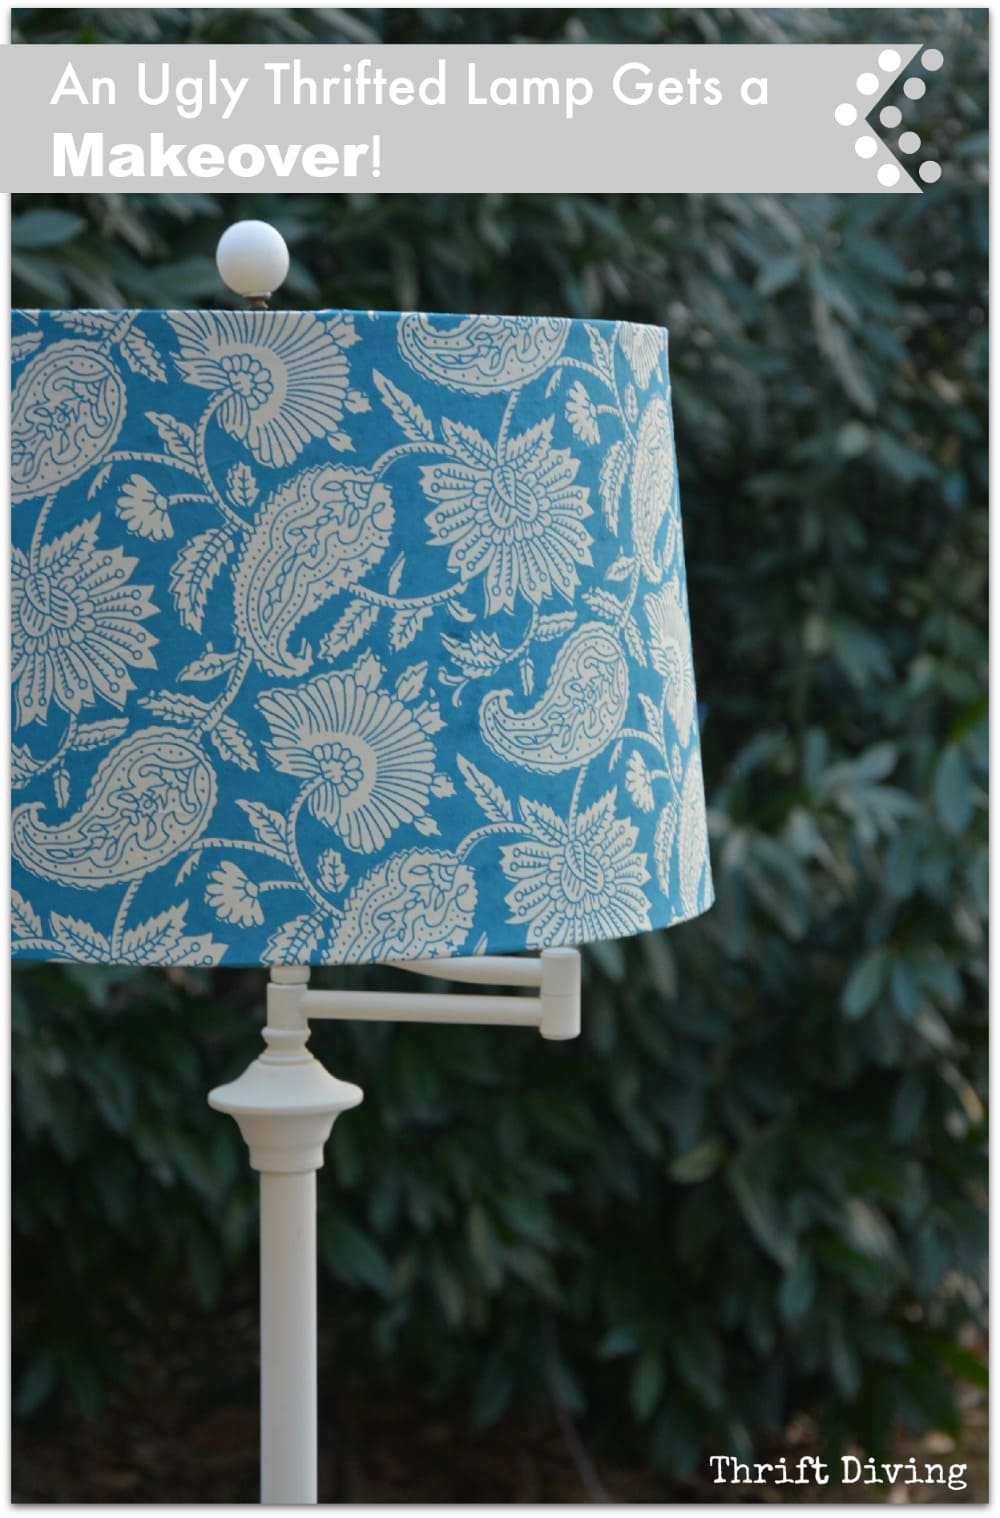 An Ugly Lamp From the Thrift Store Gets a Makeover!